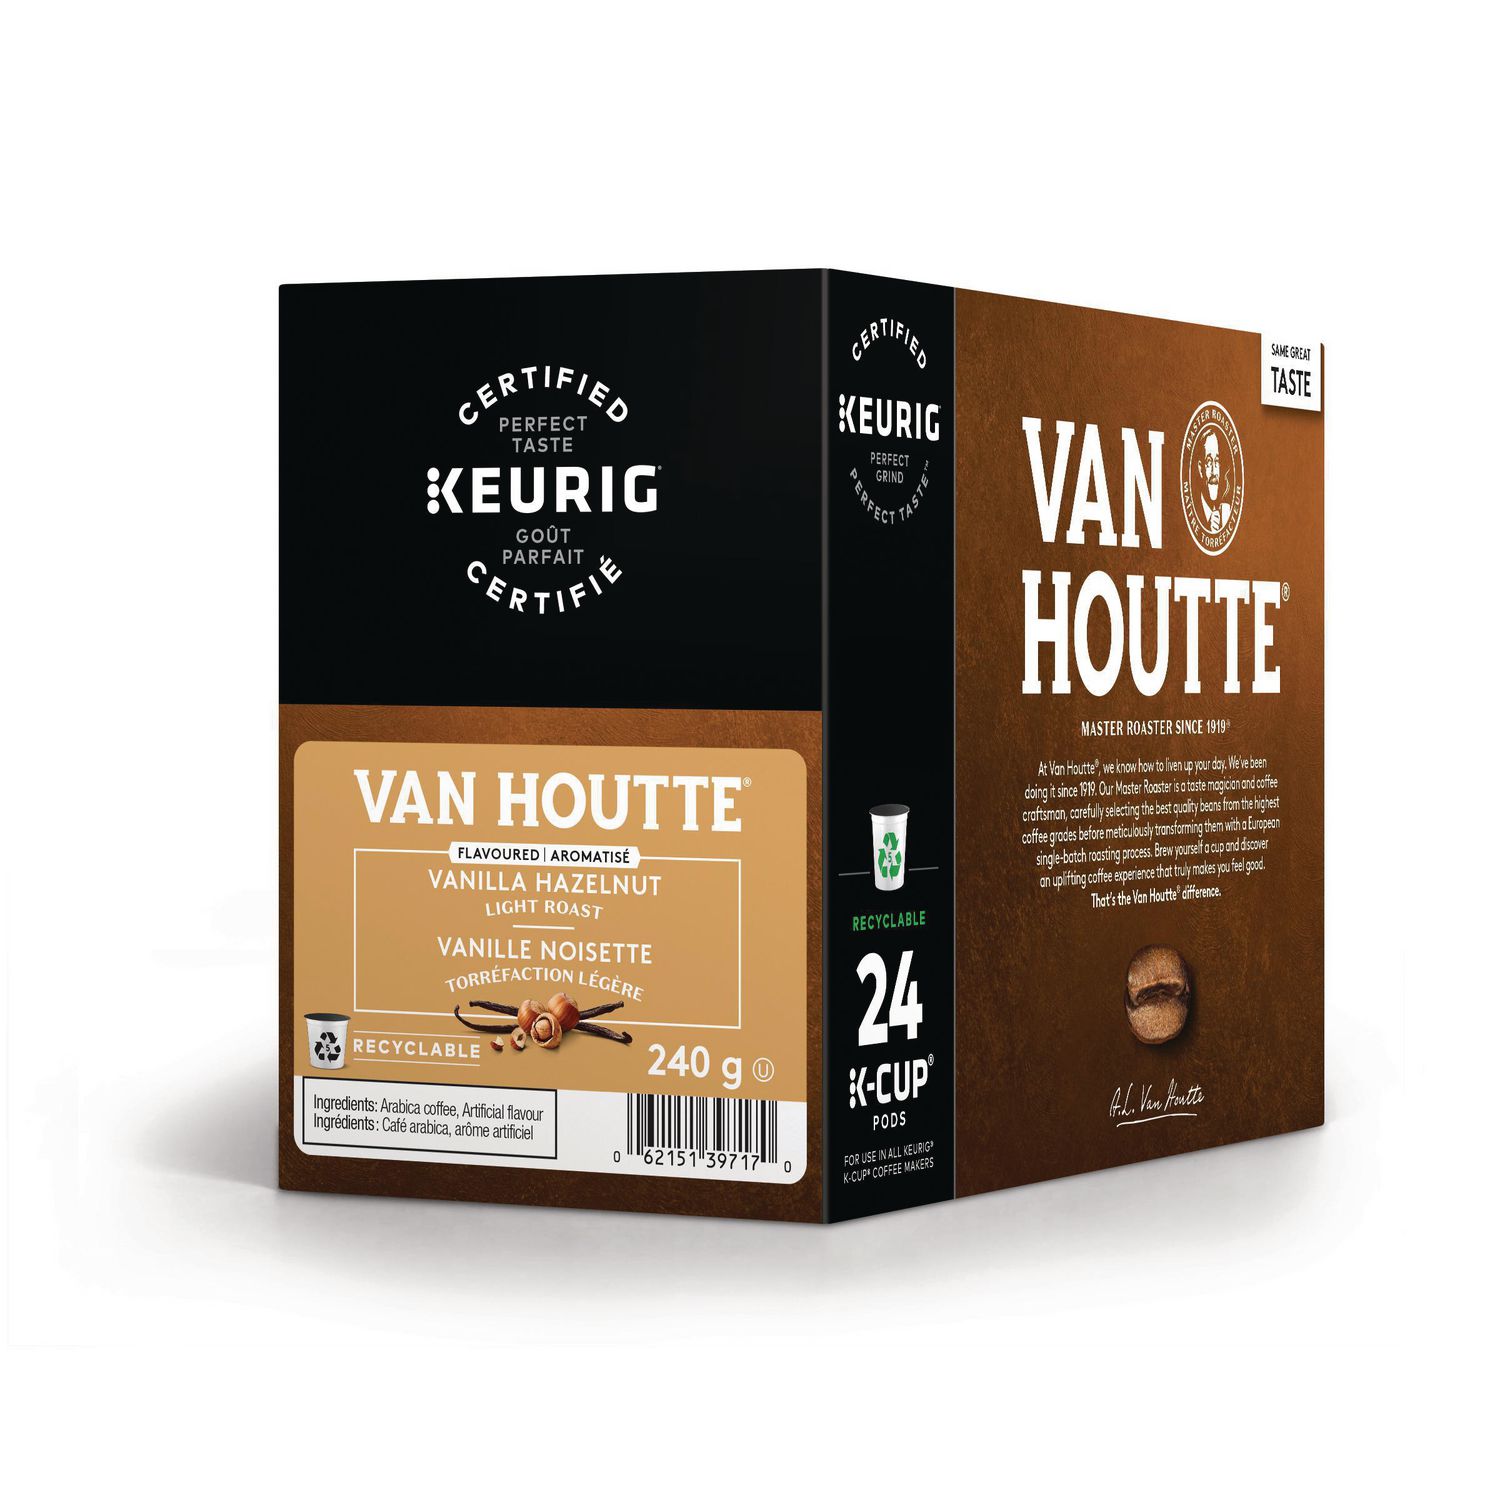 Van Houtte French Vanilla and Chocolate Raspberry Truffle Recyclable K-Cup Coffee Pods 24 Count For Keurig Coffee Makers